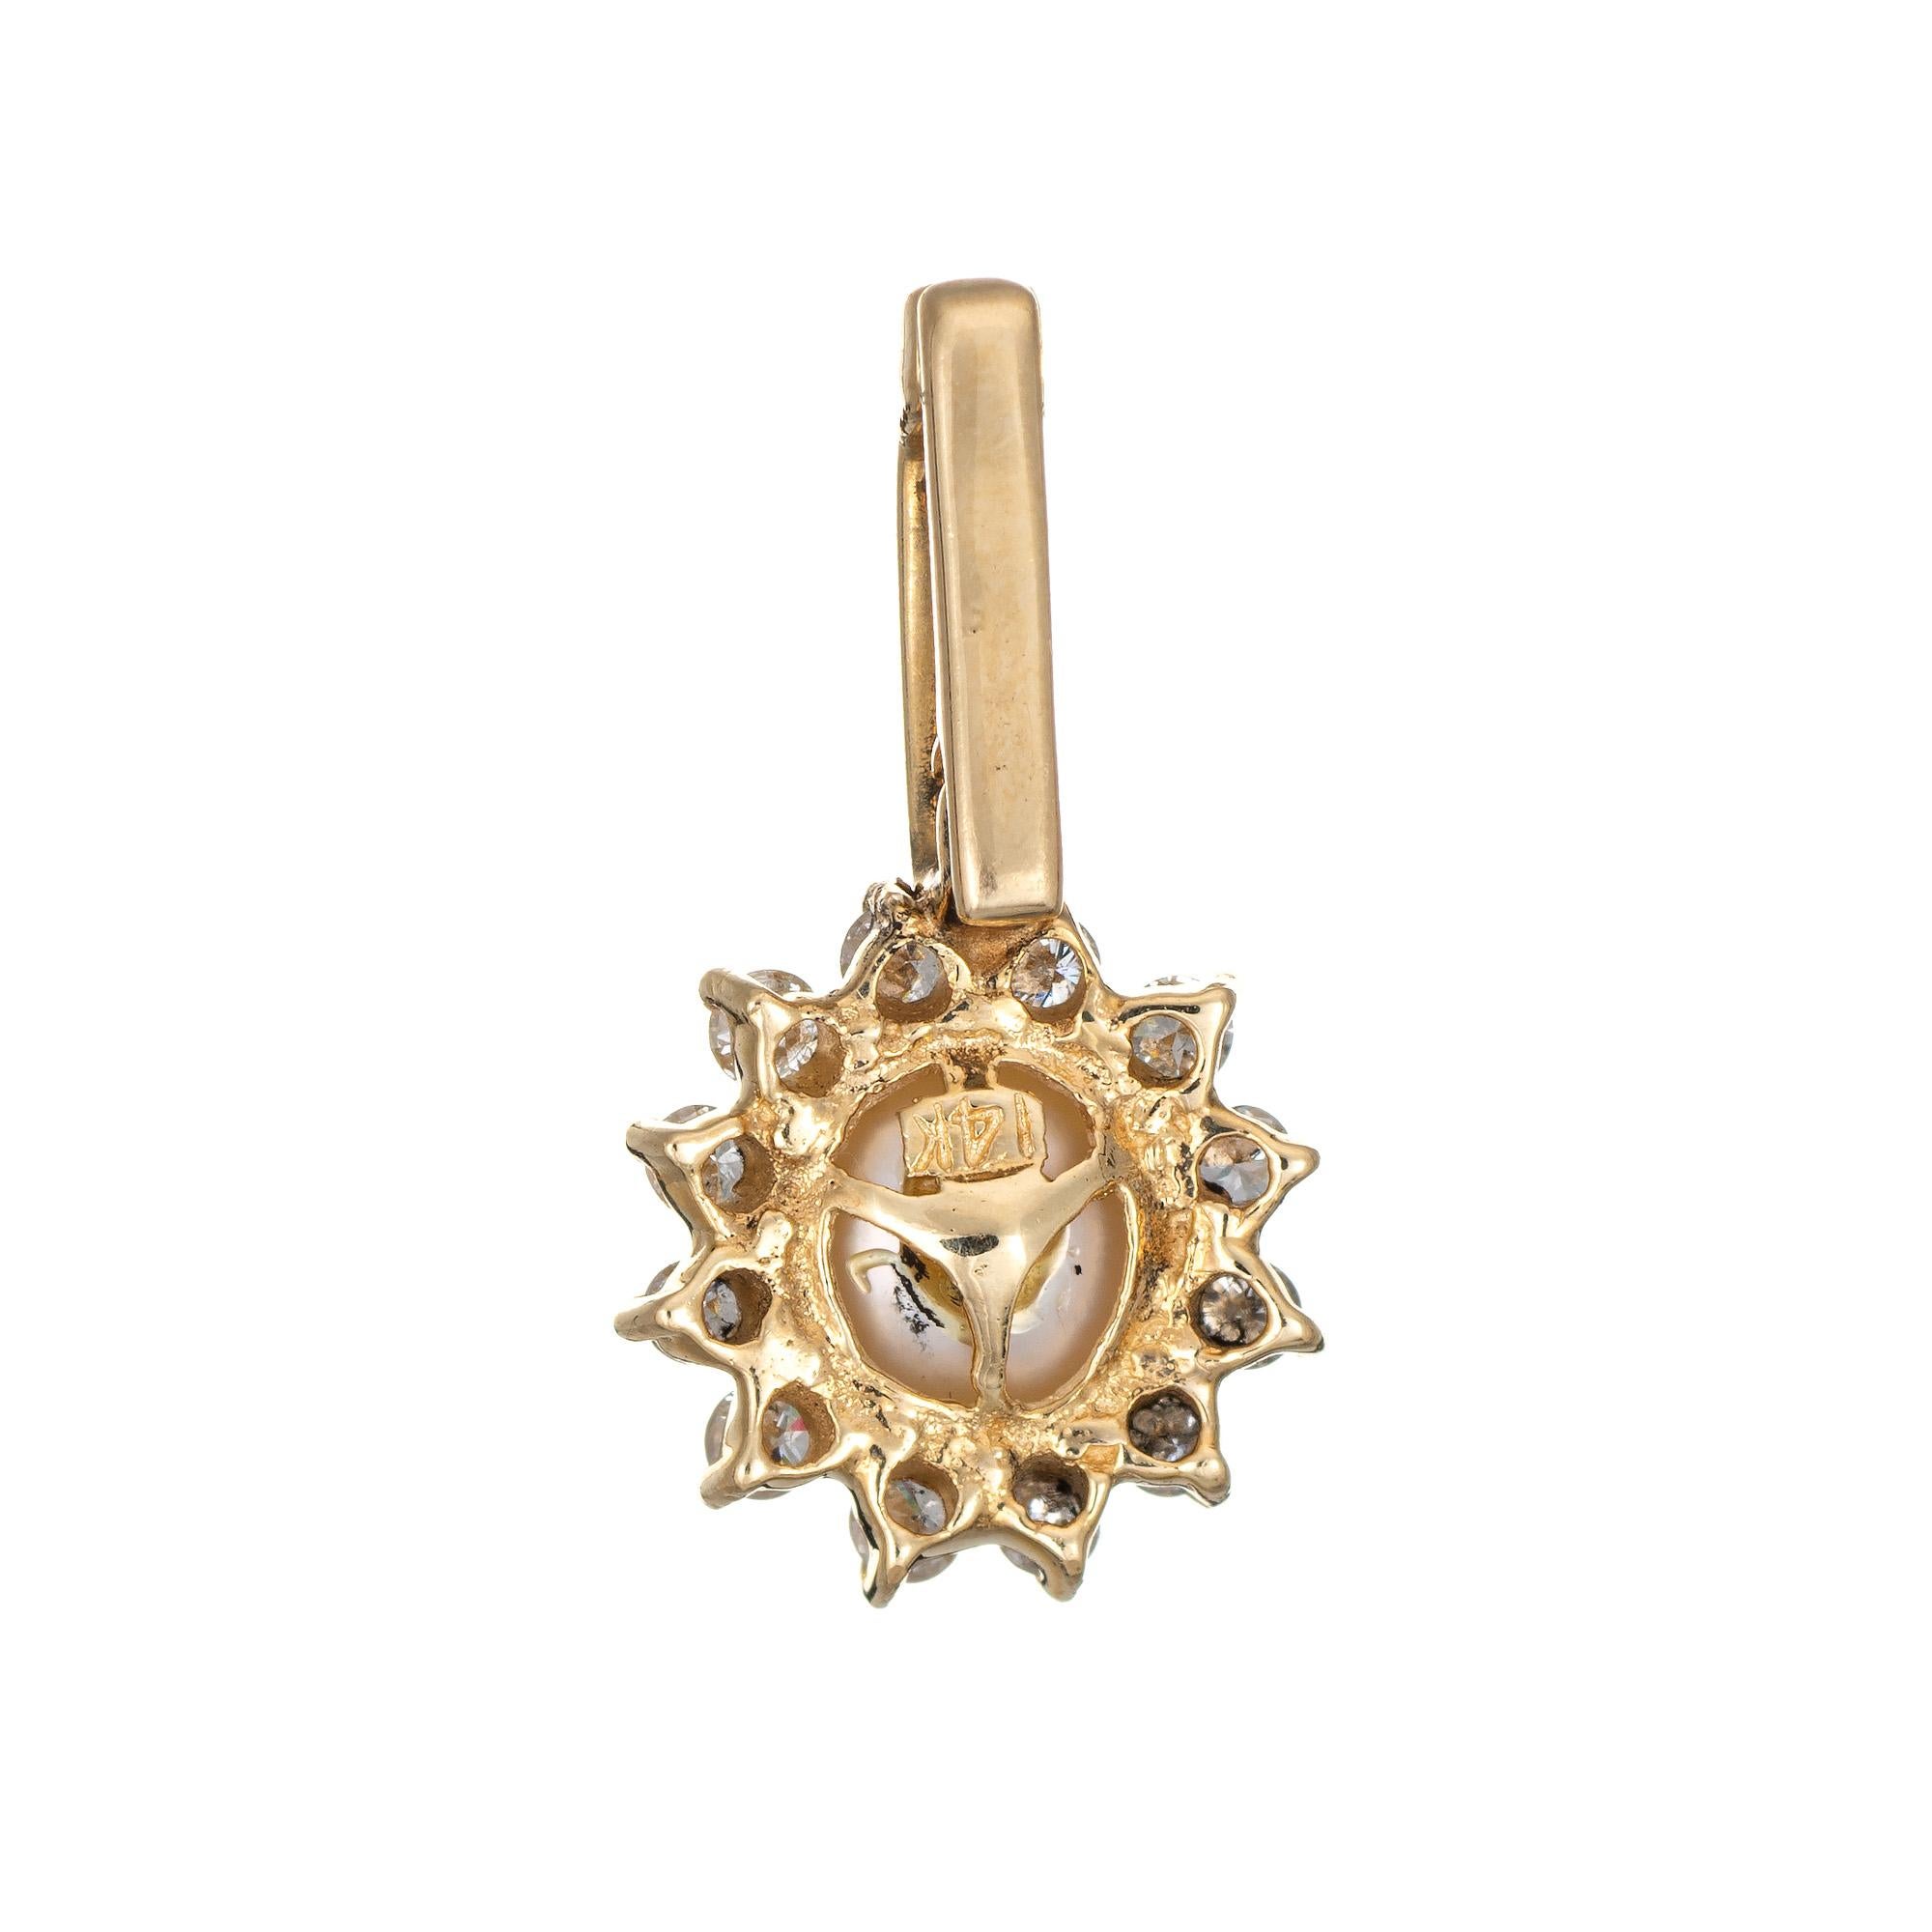 Finely detailed vintage cultured pearl & diamond pendant crafted in 14k yellow gold.

8mm cultured pearl is accented with 12 estimated 0.02 carat diamonds. The diamonds total an estimated 0.24 carats (estimated at H-I color and SI1-2 clarity).
 
The